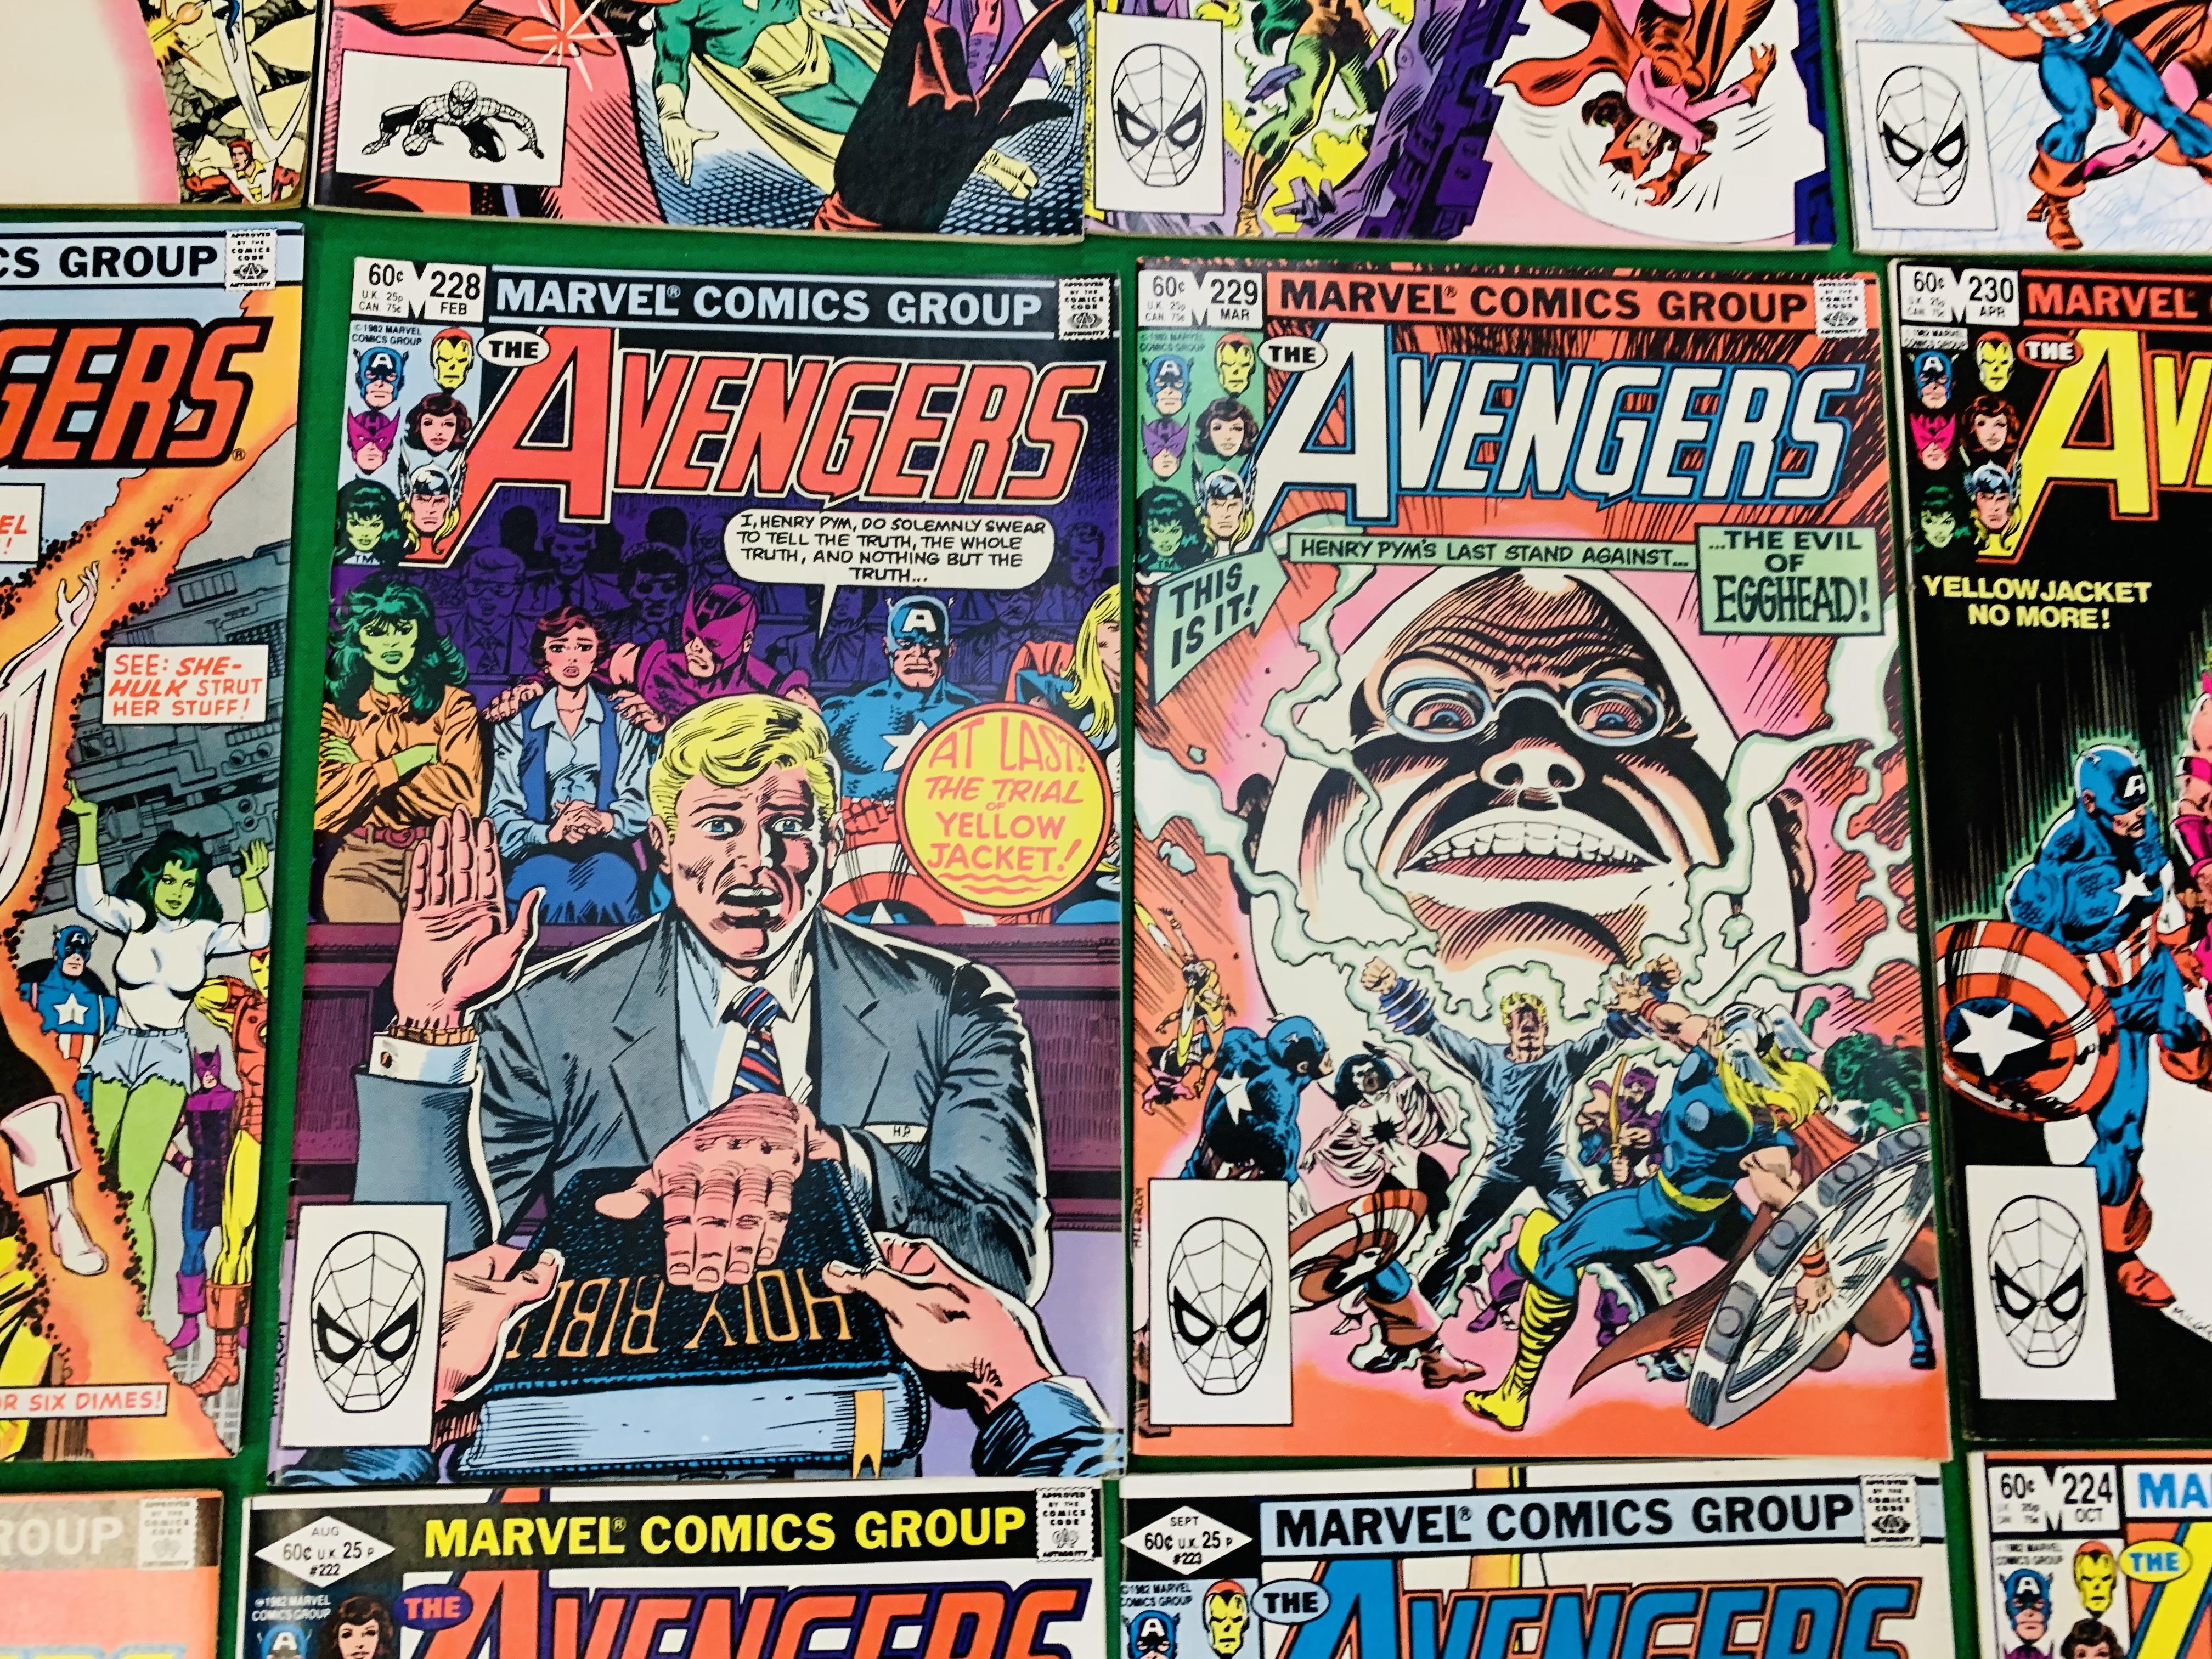 MARVEL COMICS THE AVENGERS NO. 101 - 299, MISSING ISSUES 103 AND 110. - Image 91 of 130